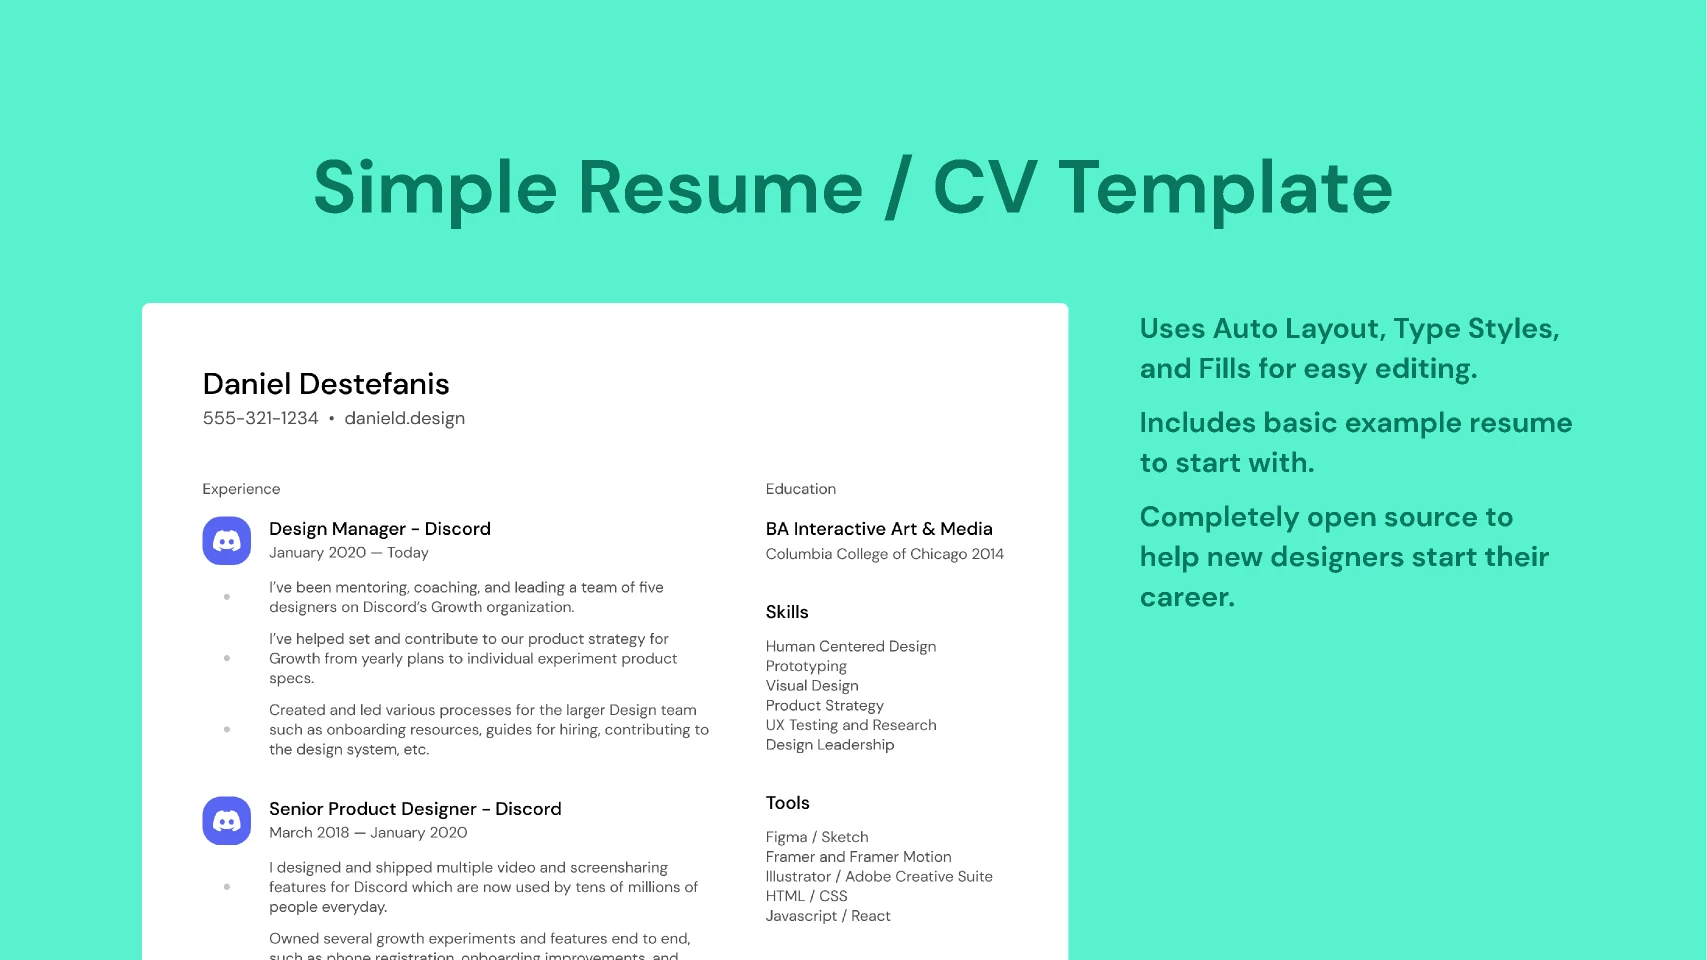 Simple Resume/CV Template for Figma and Adobe XD